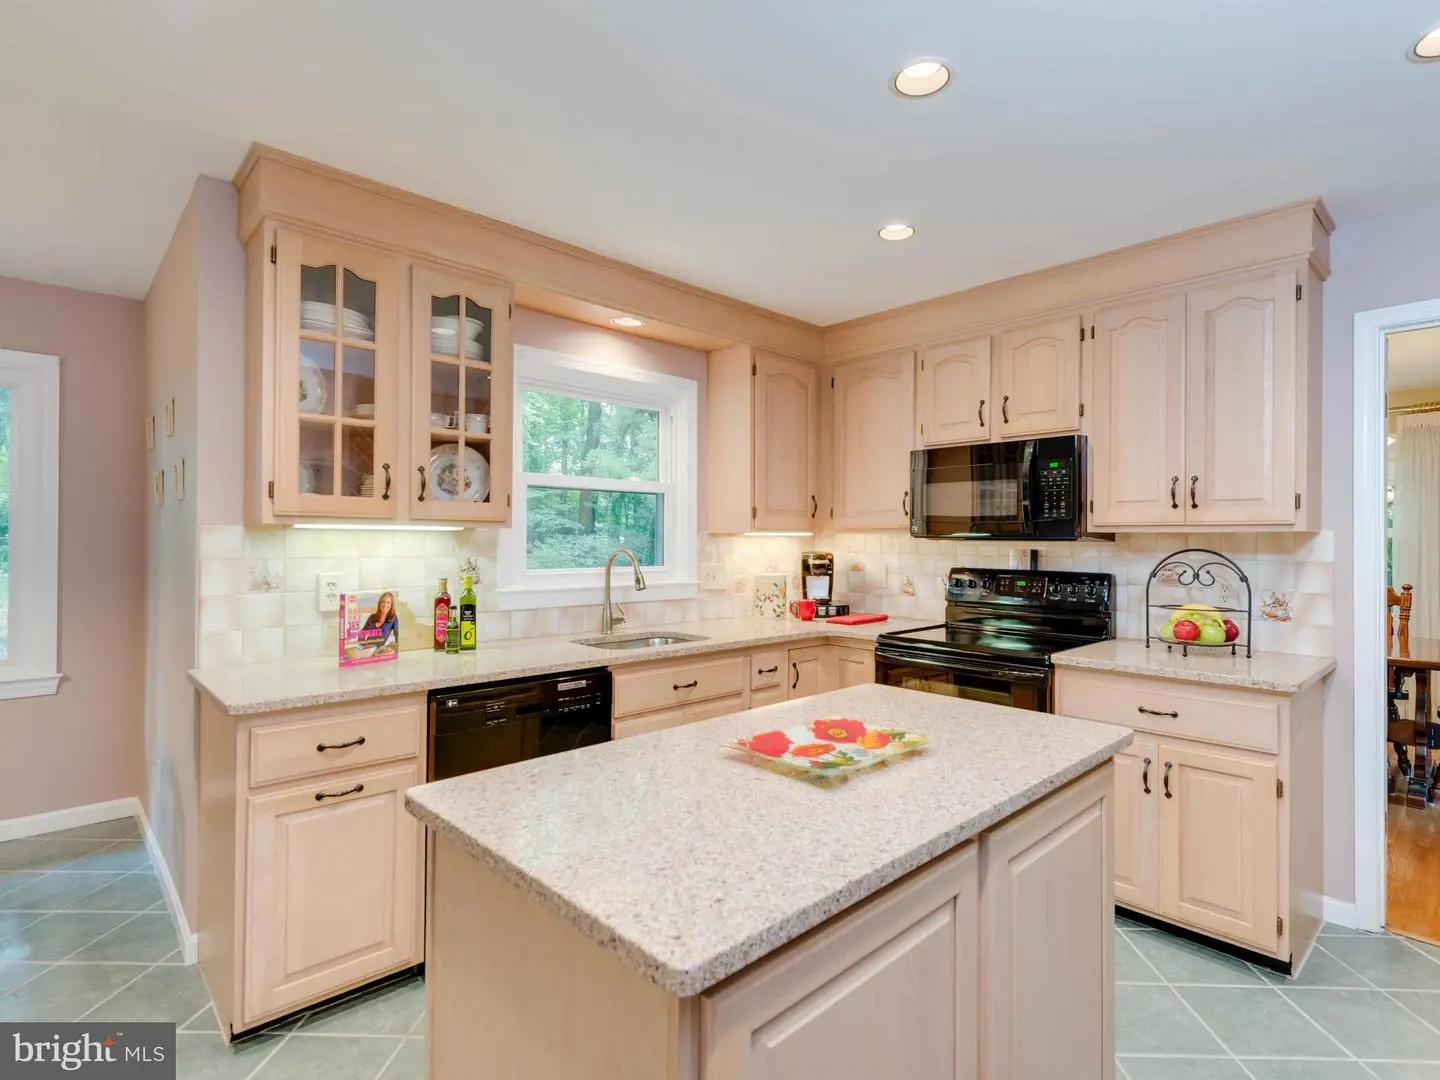 1003712923-300761236995-2021-09-07-04-59-49  |   | Falls Church Delaware Real Estate For Sale | MLS# 1003712923  - Best of Northern Virginia